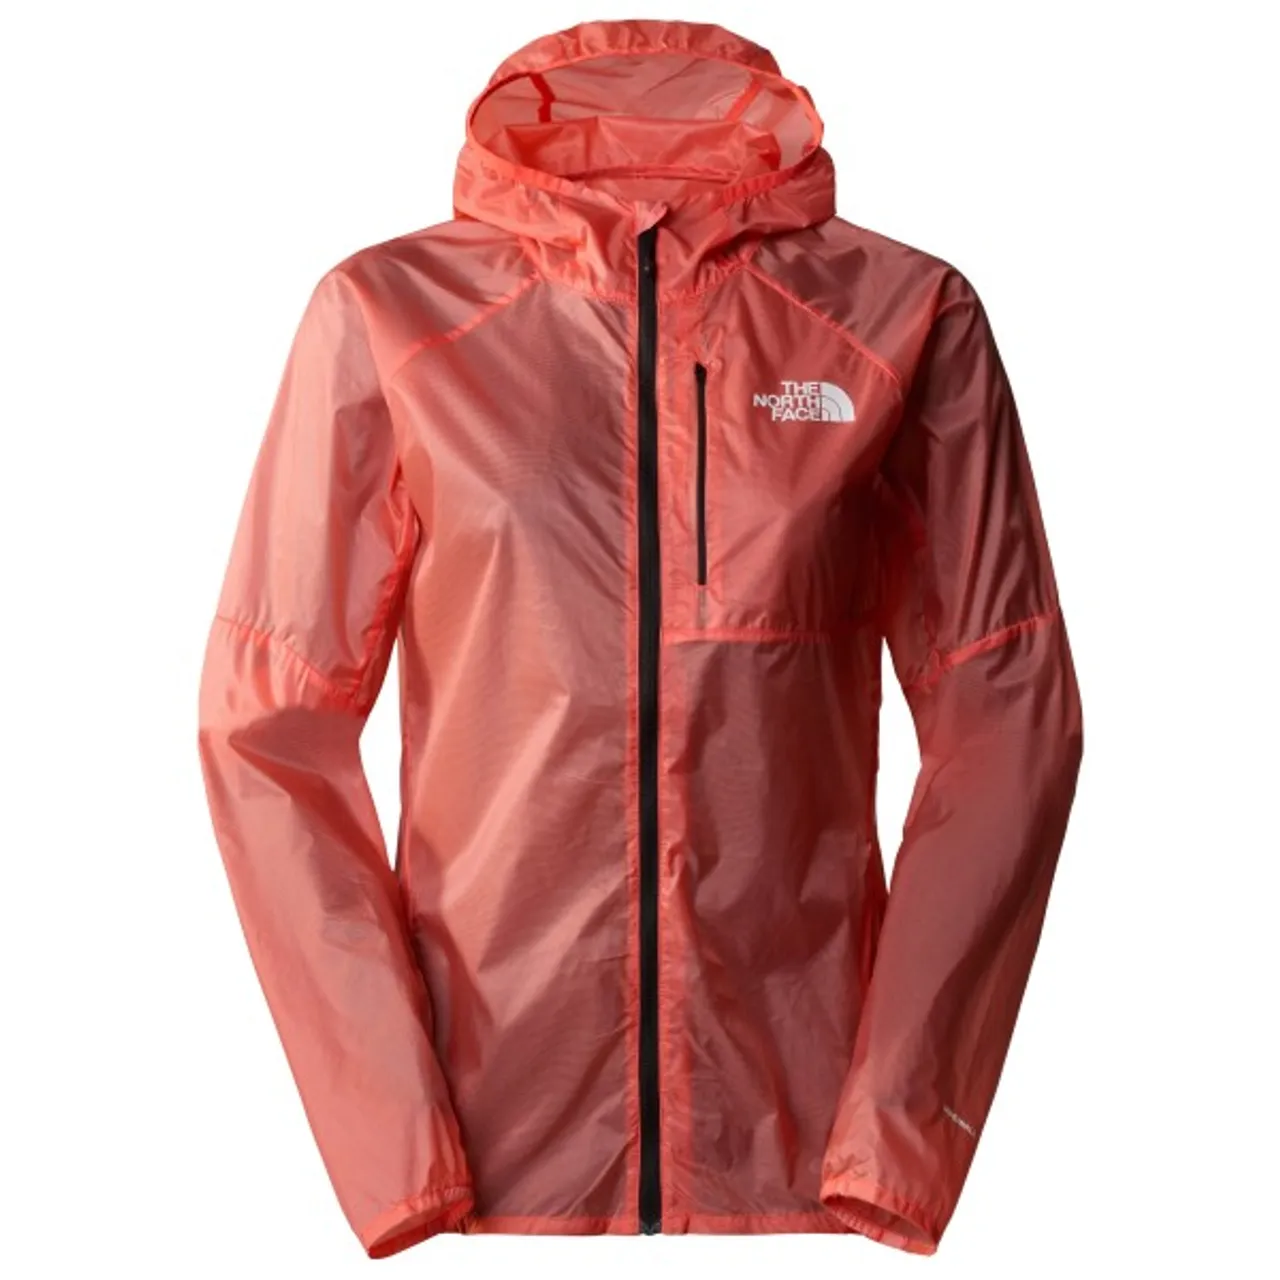 The North Face - Women's Windstream Shell - Windproof jacket